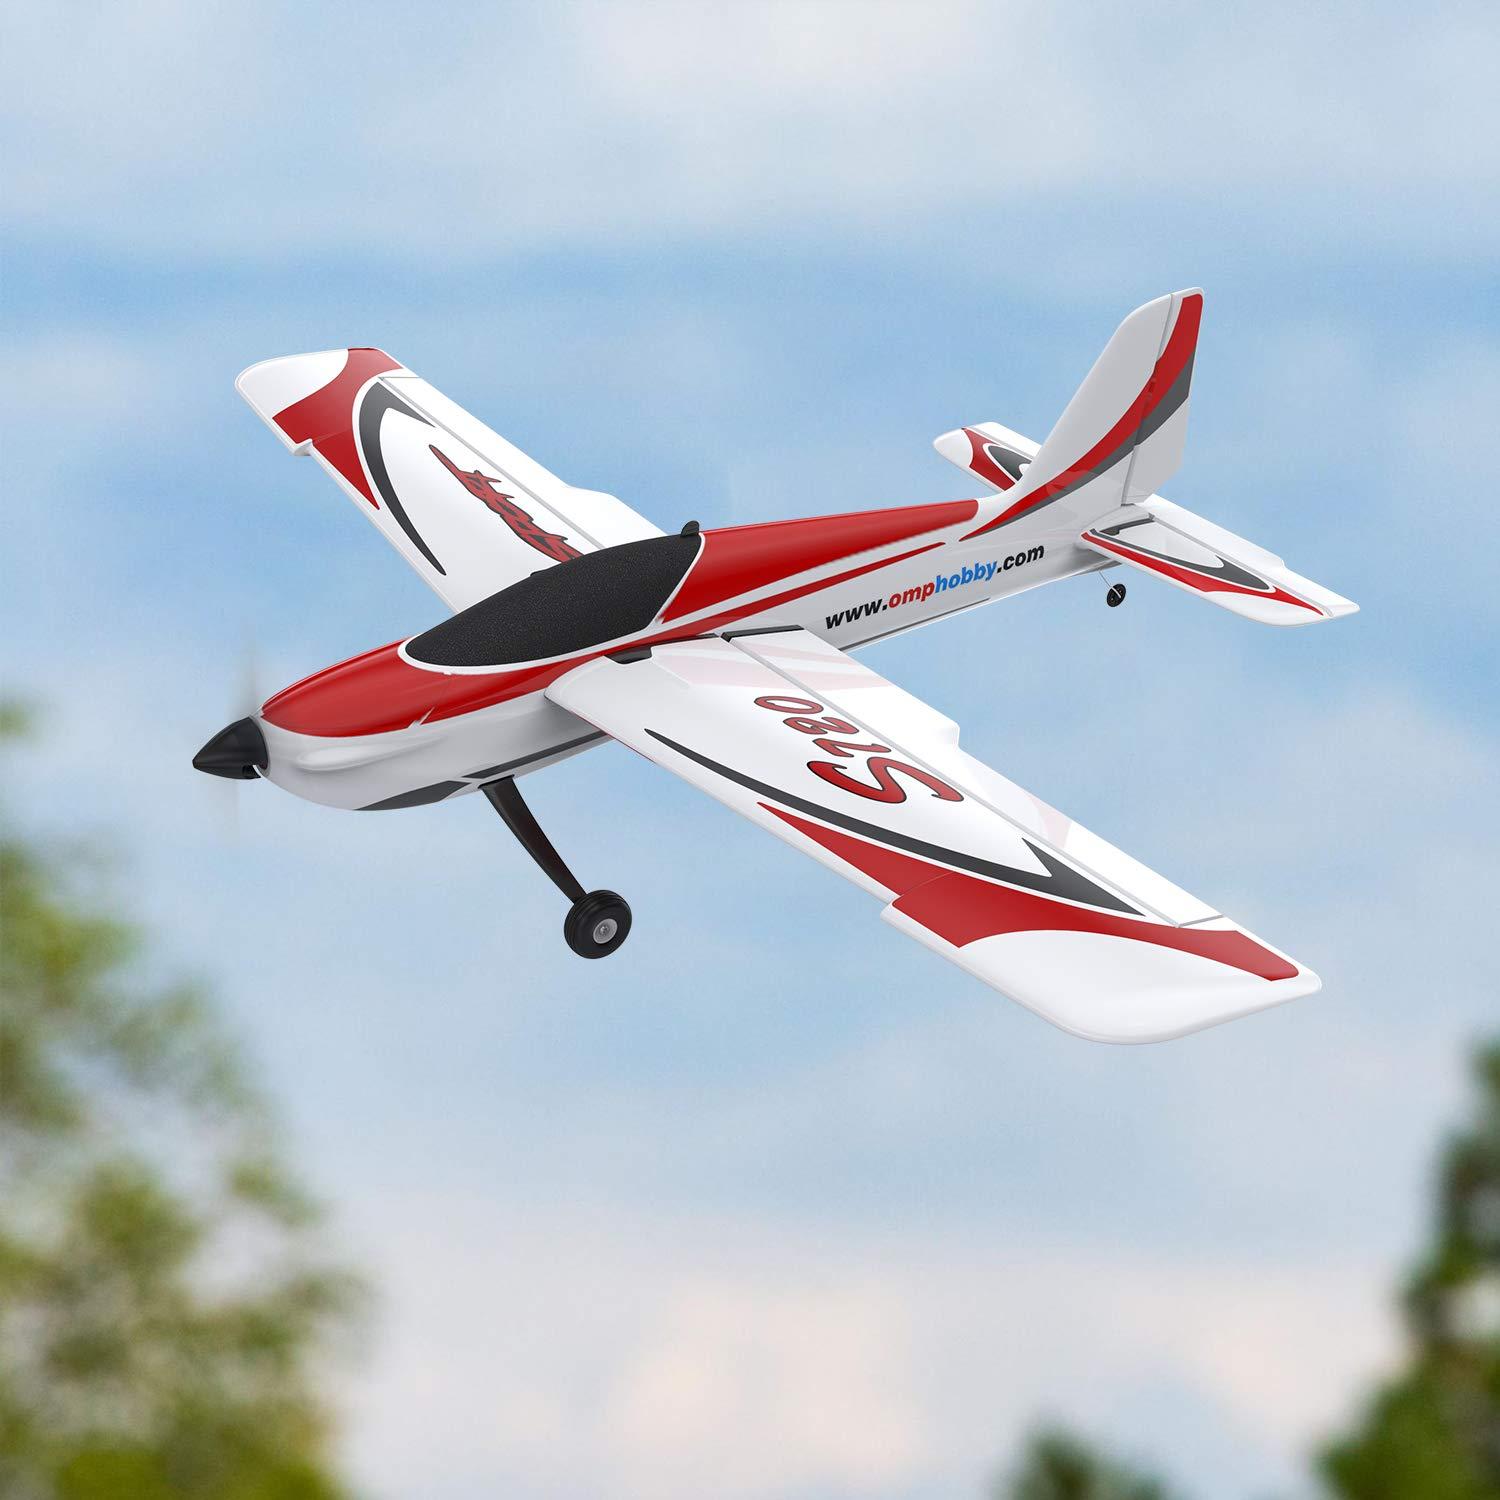 S720 Rc Plane: Top Features of the s720 RC Plane